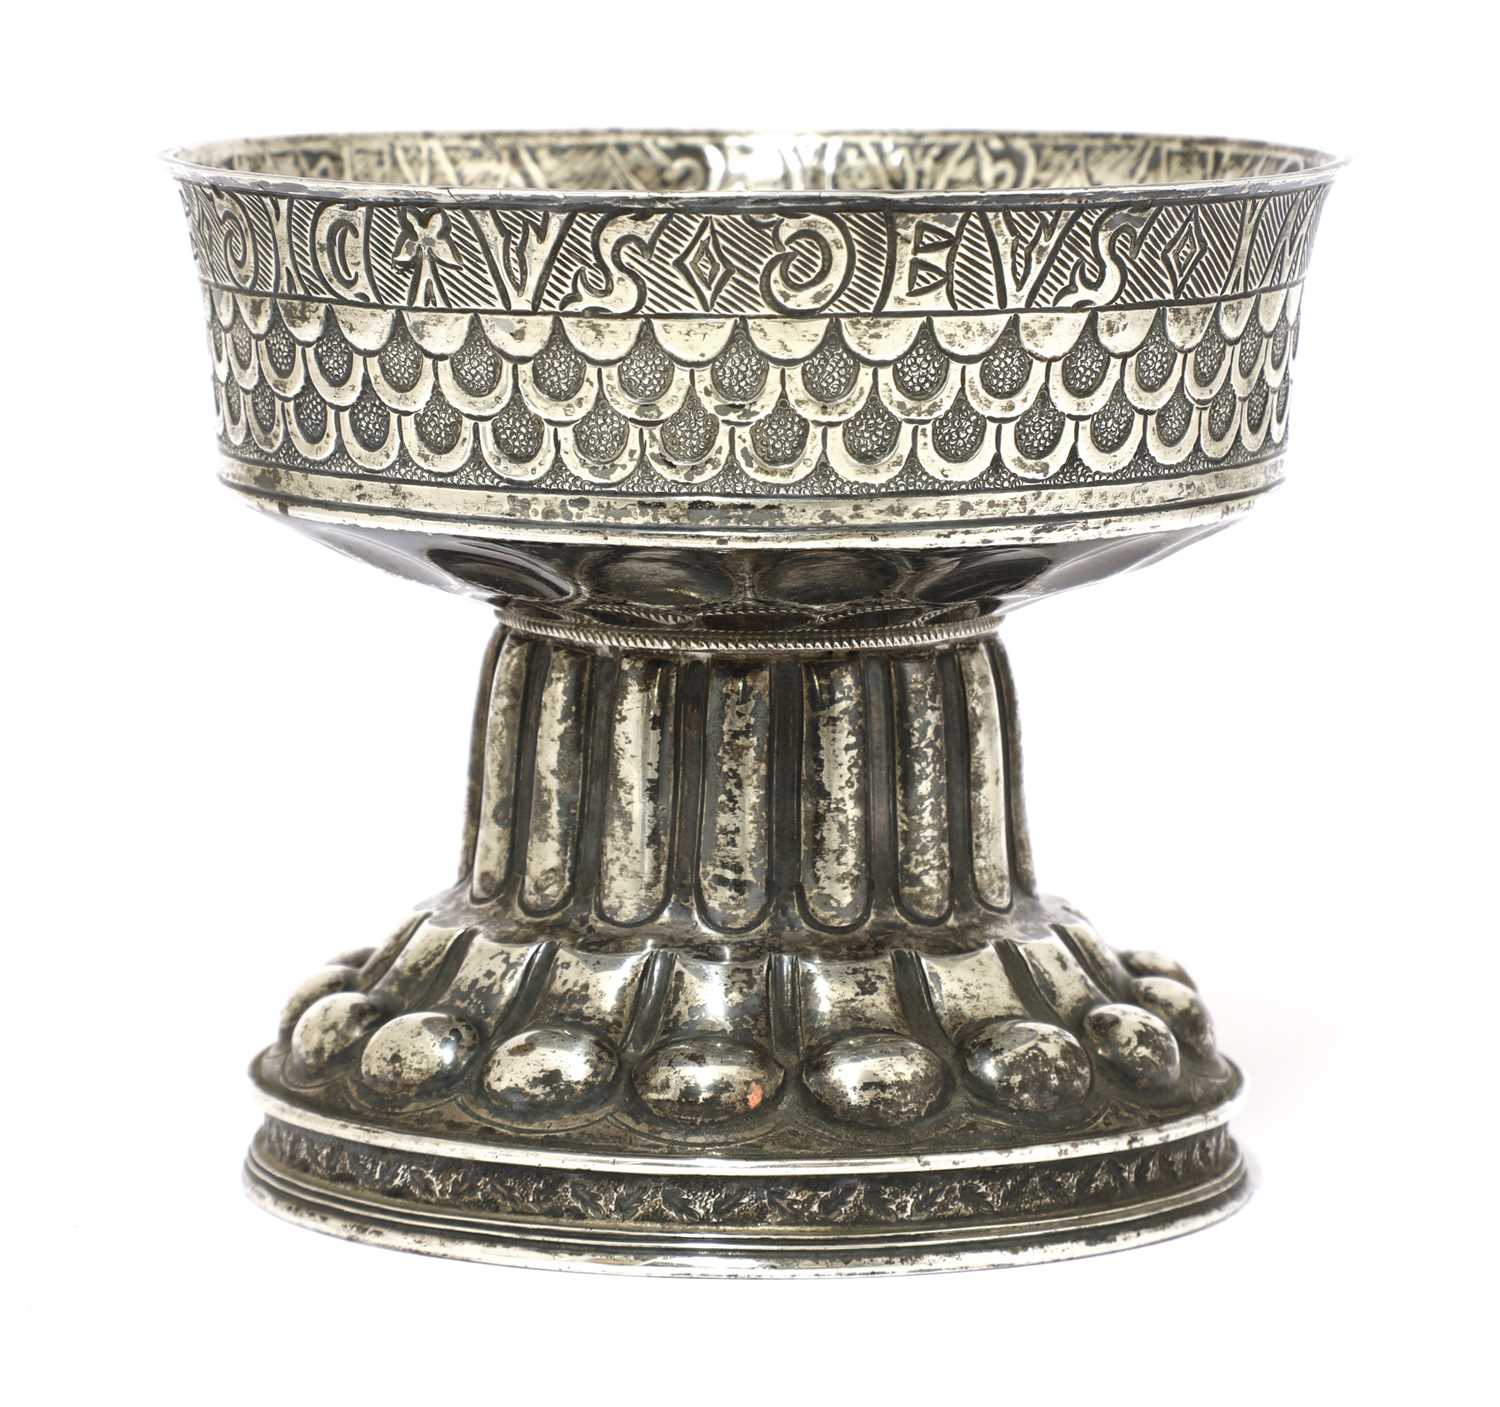 Lot 20 - A silver gilt reproduction replica of The Tudor (Holms) Cup